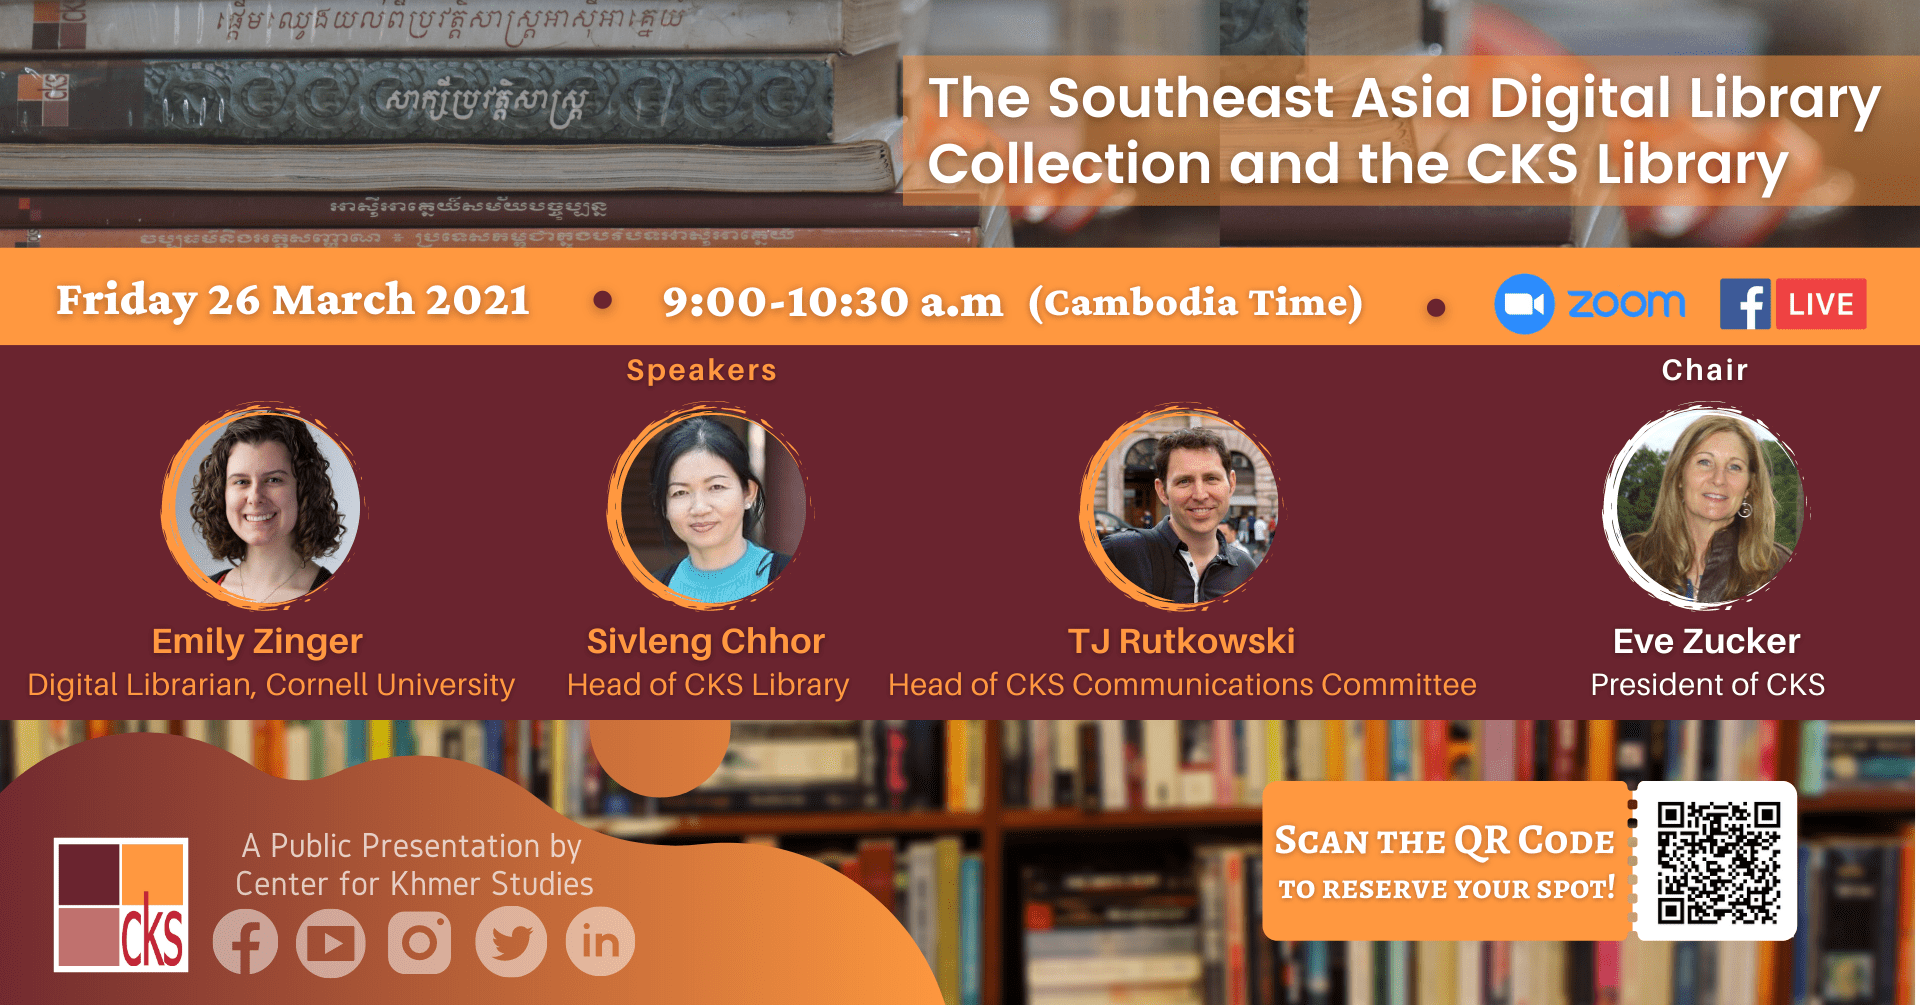 The Southeast Asia Digital Library Collection and the CKS Library